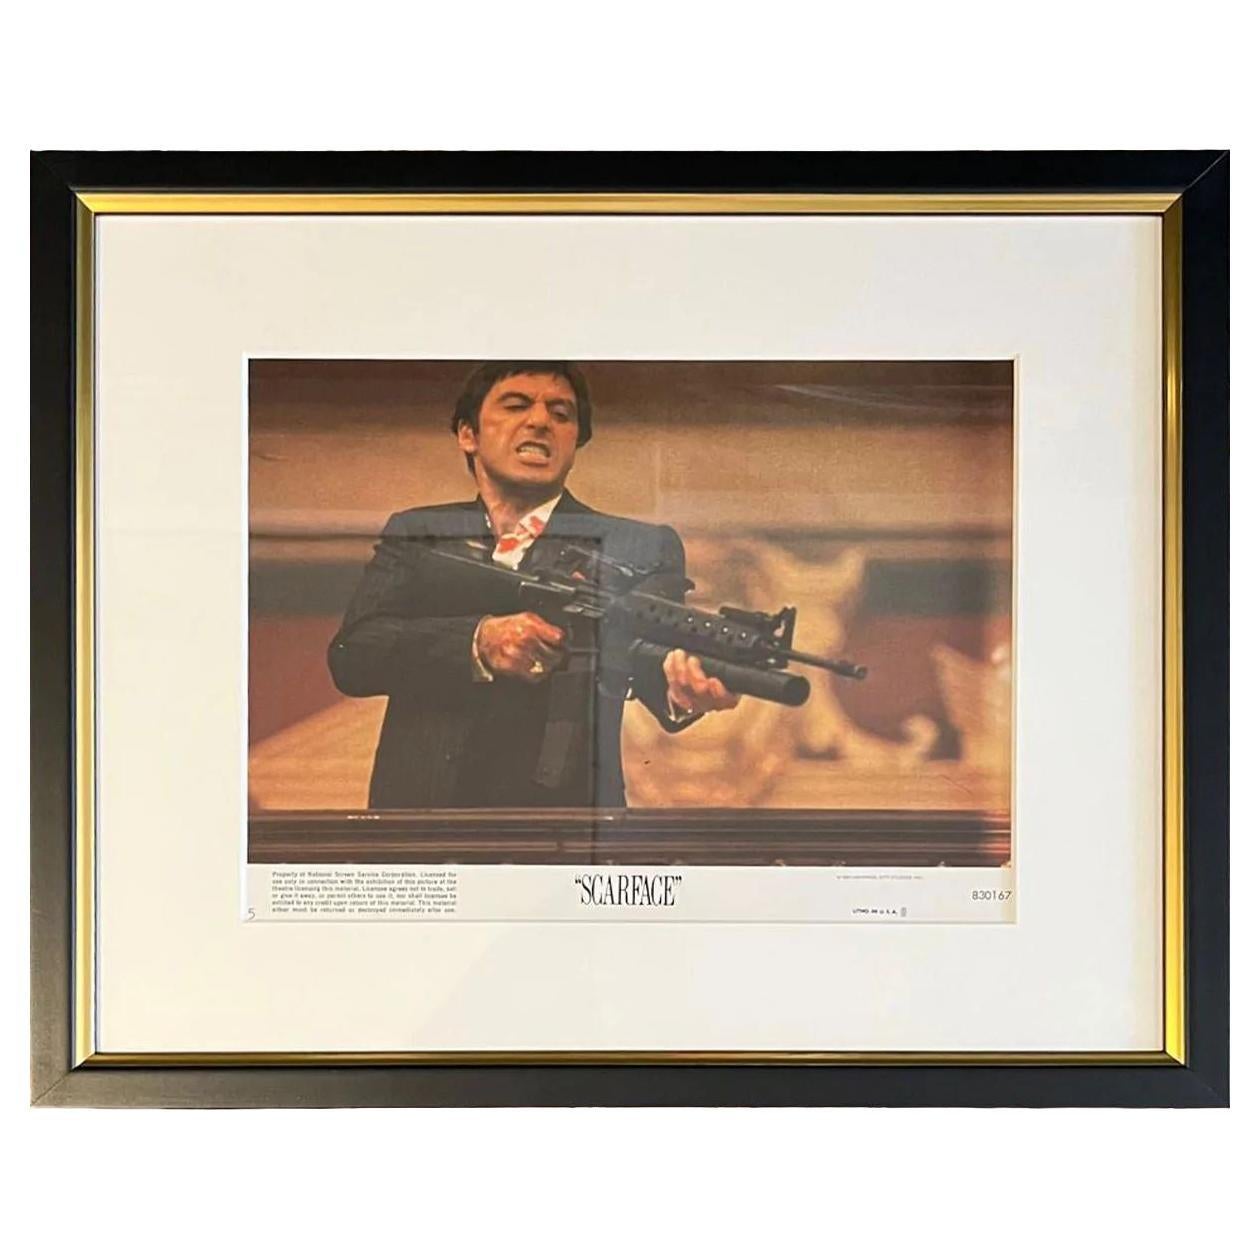 scarface movie poster framed